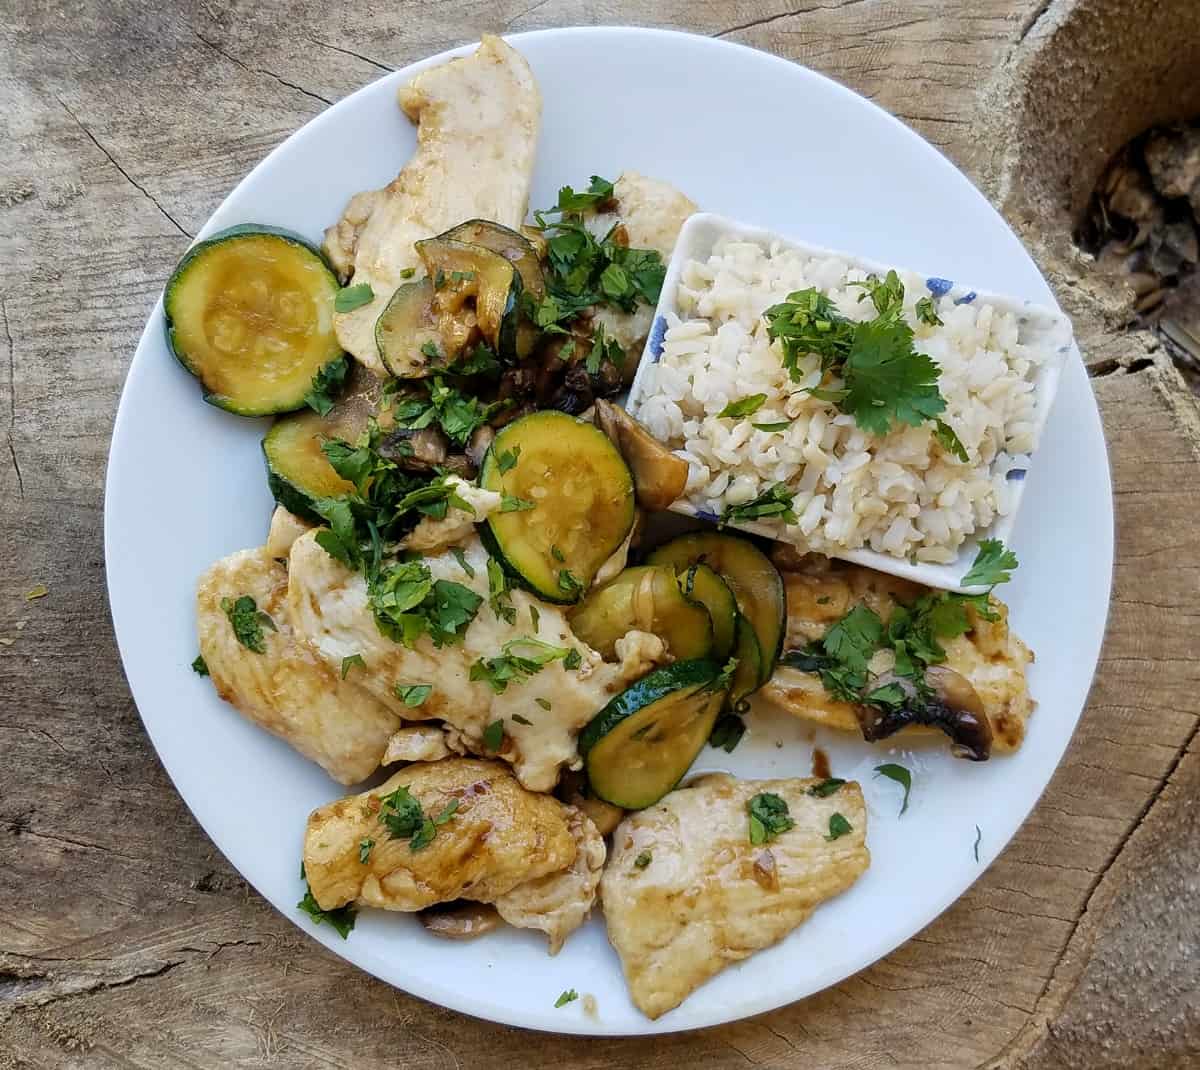 Chicken mushroom stir-fry with zucchini and side of rice on white dinner plate.